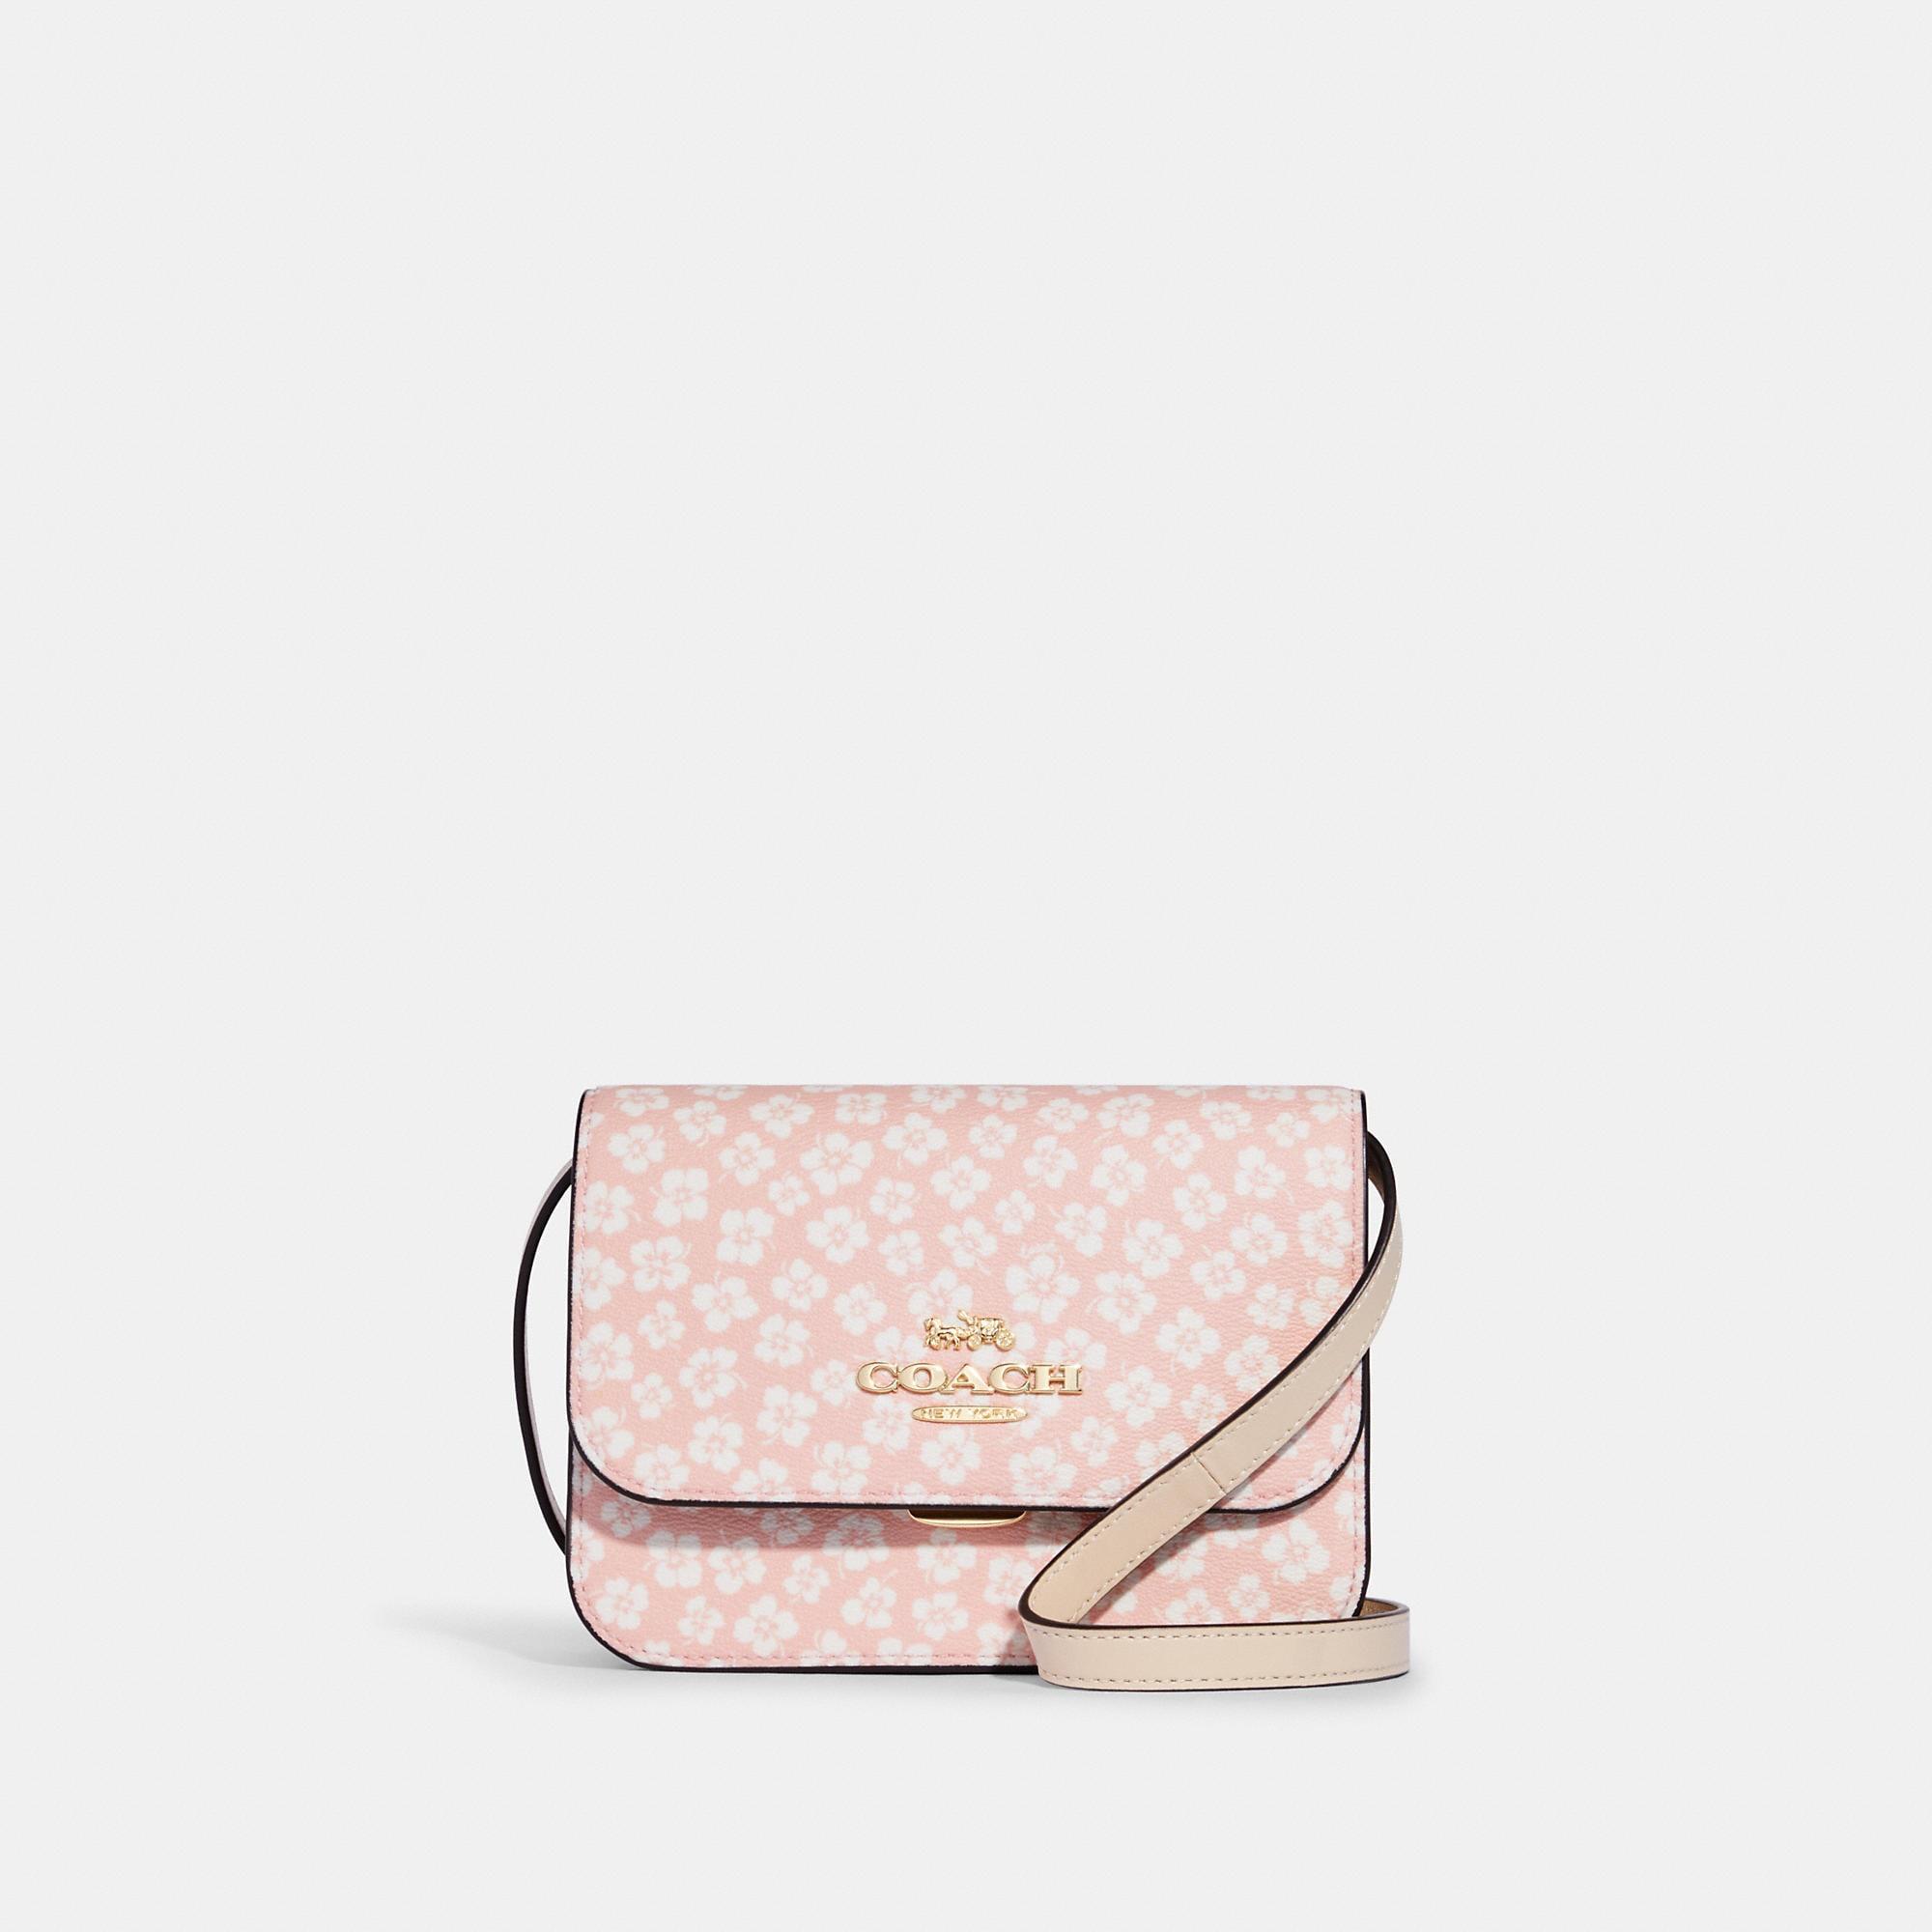 Coach Outlet Corner Zip Wristlet With Graphic Ditsy Floral Print in Pink